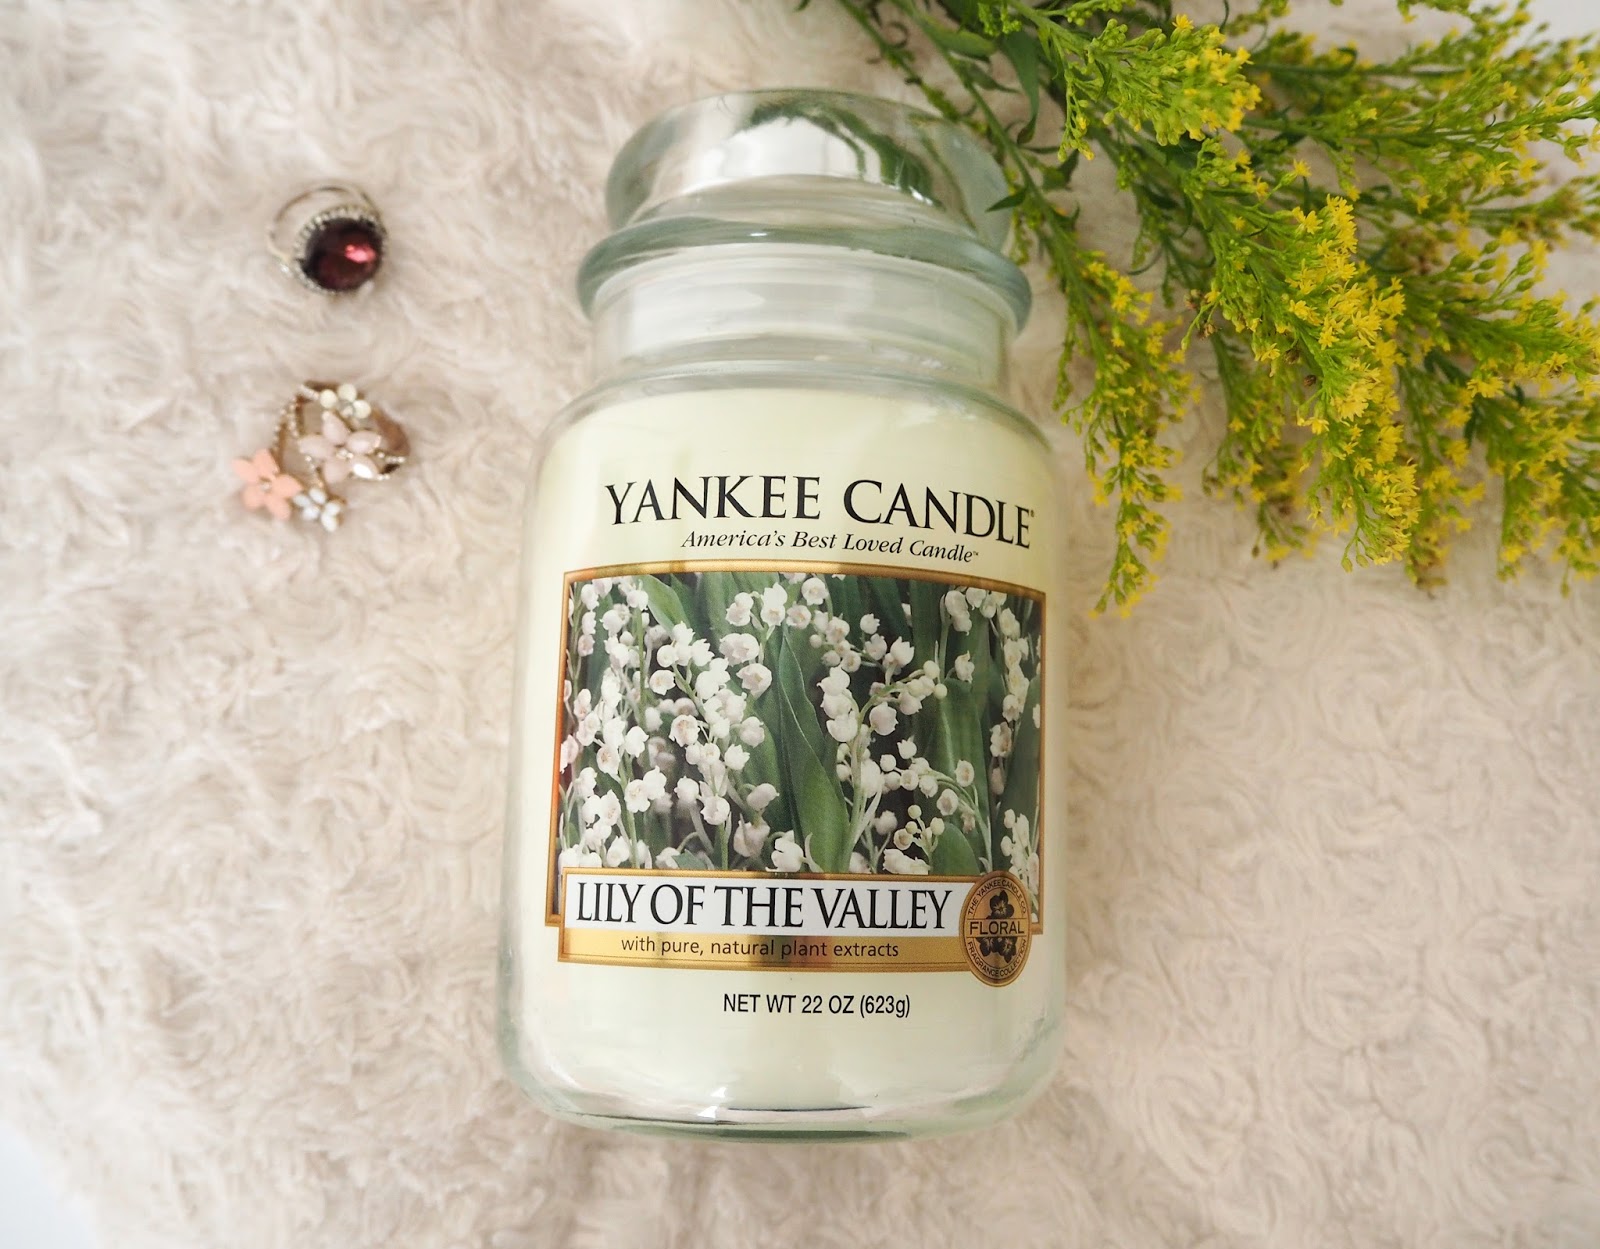 Loves List: February, Katie Kirk Loves, UK Blogger, Beauty Blogger, Make Up Blogger, Beauty Review, Candle Blogger, Yankee Candle Lily of the Valley, Yankee Candle,, Pink Make Up